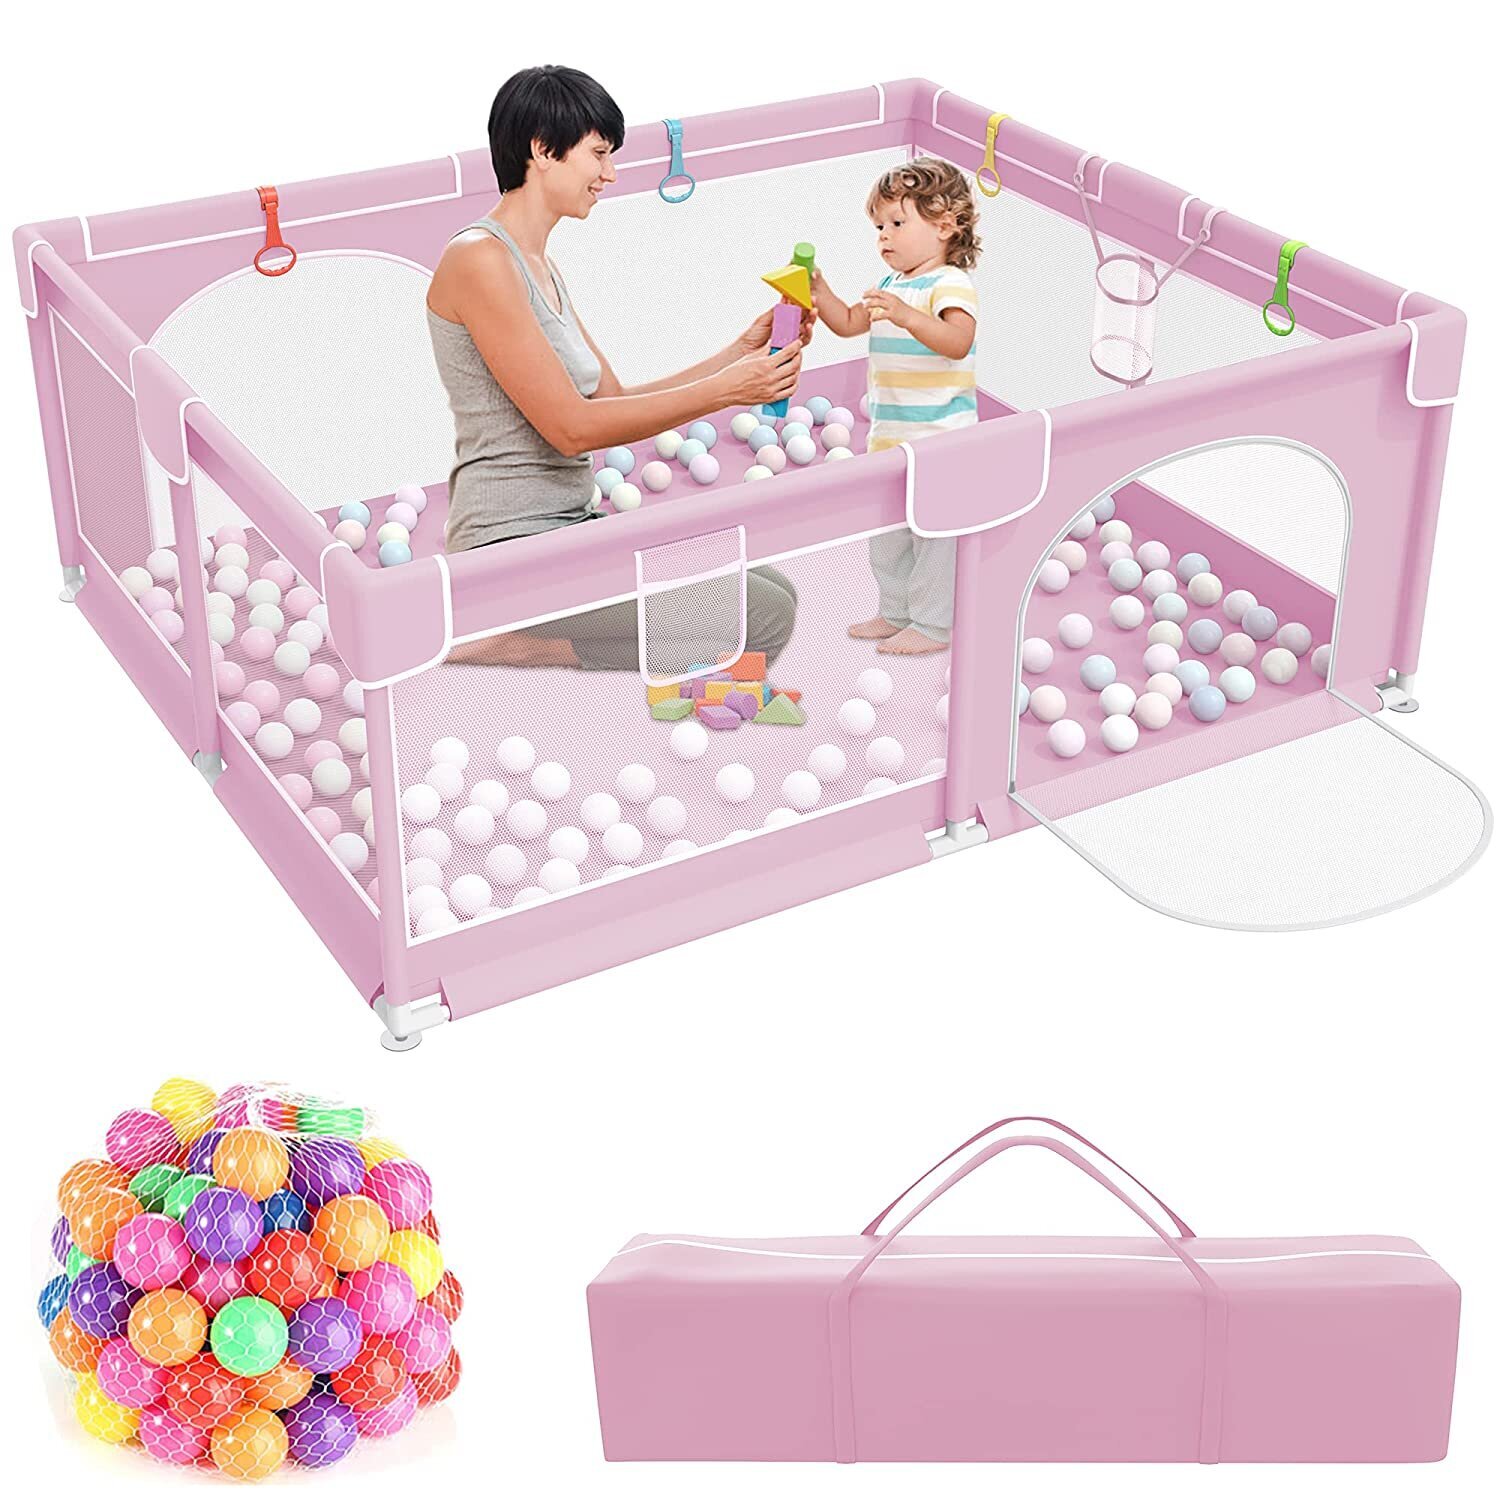 Playpens for toddlers that come with their very own ball pits